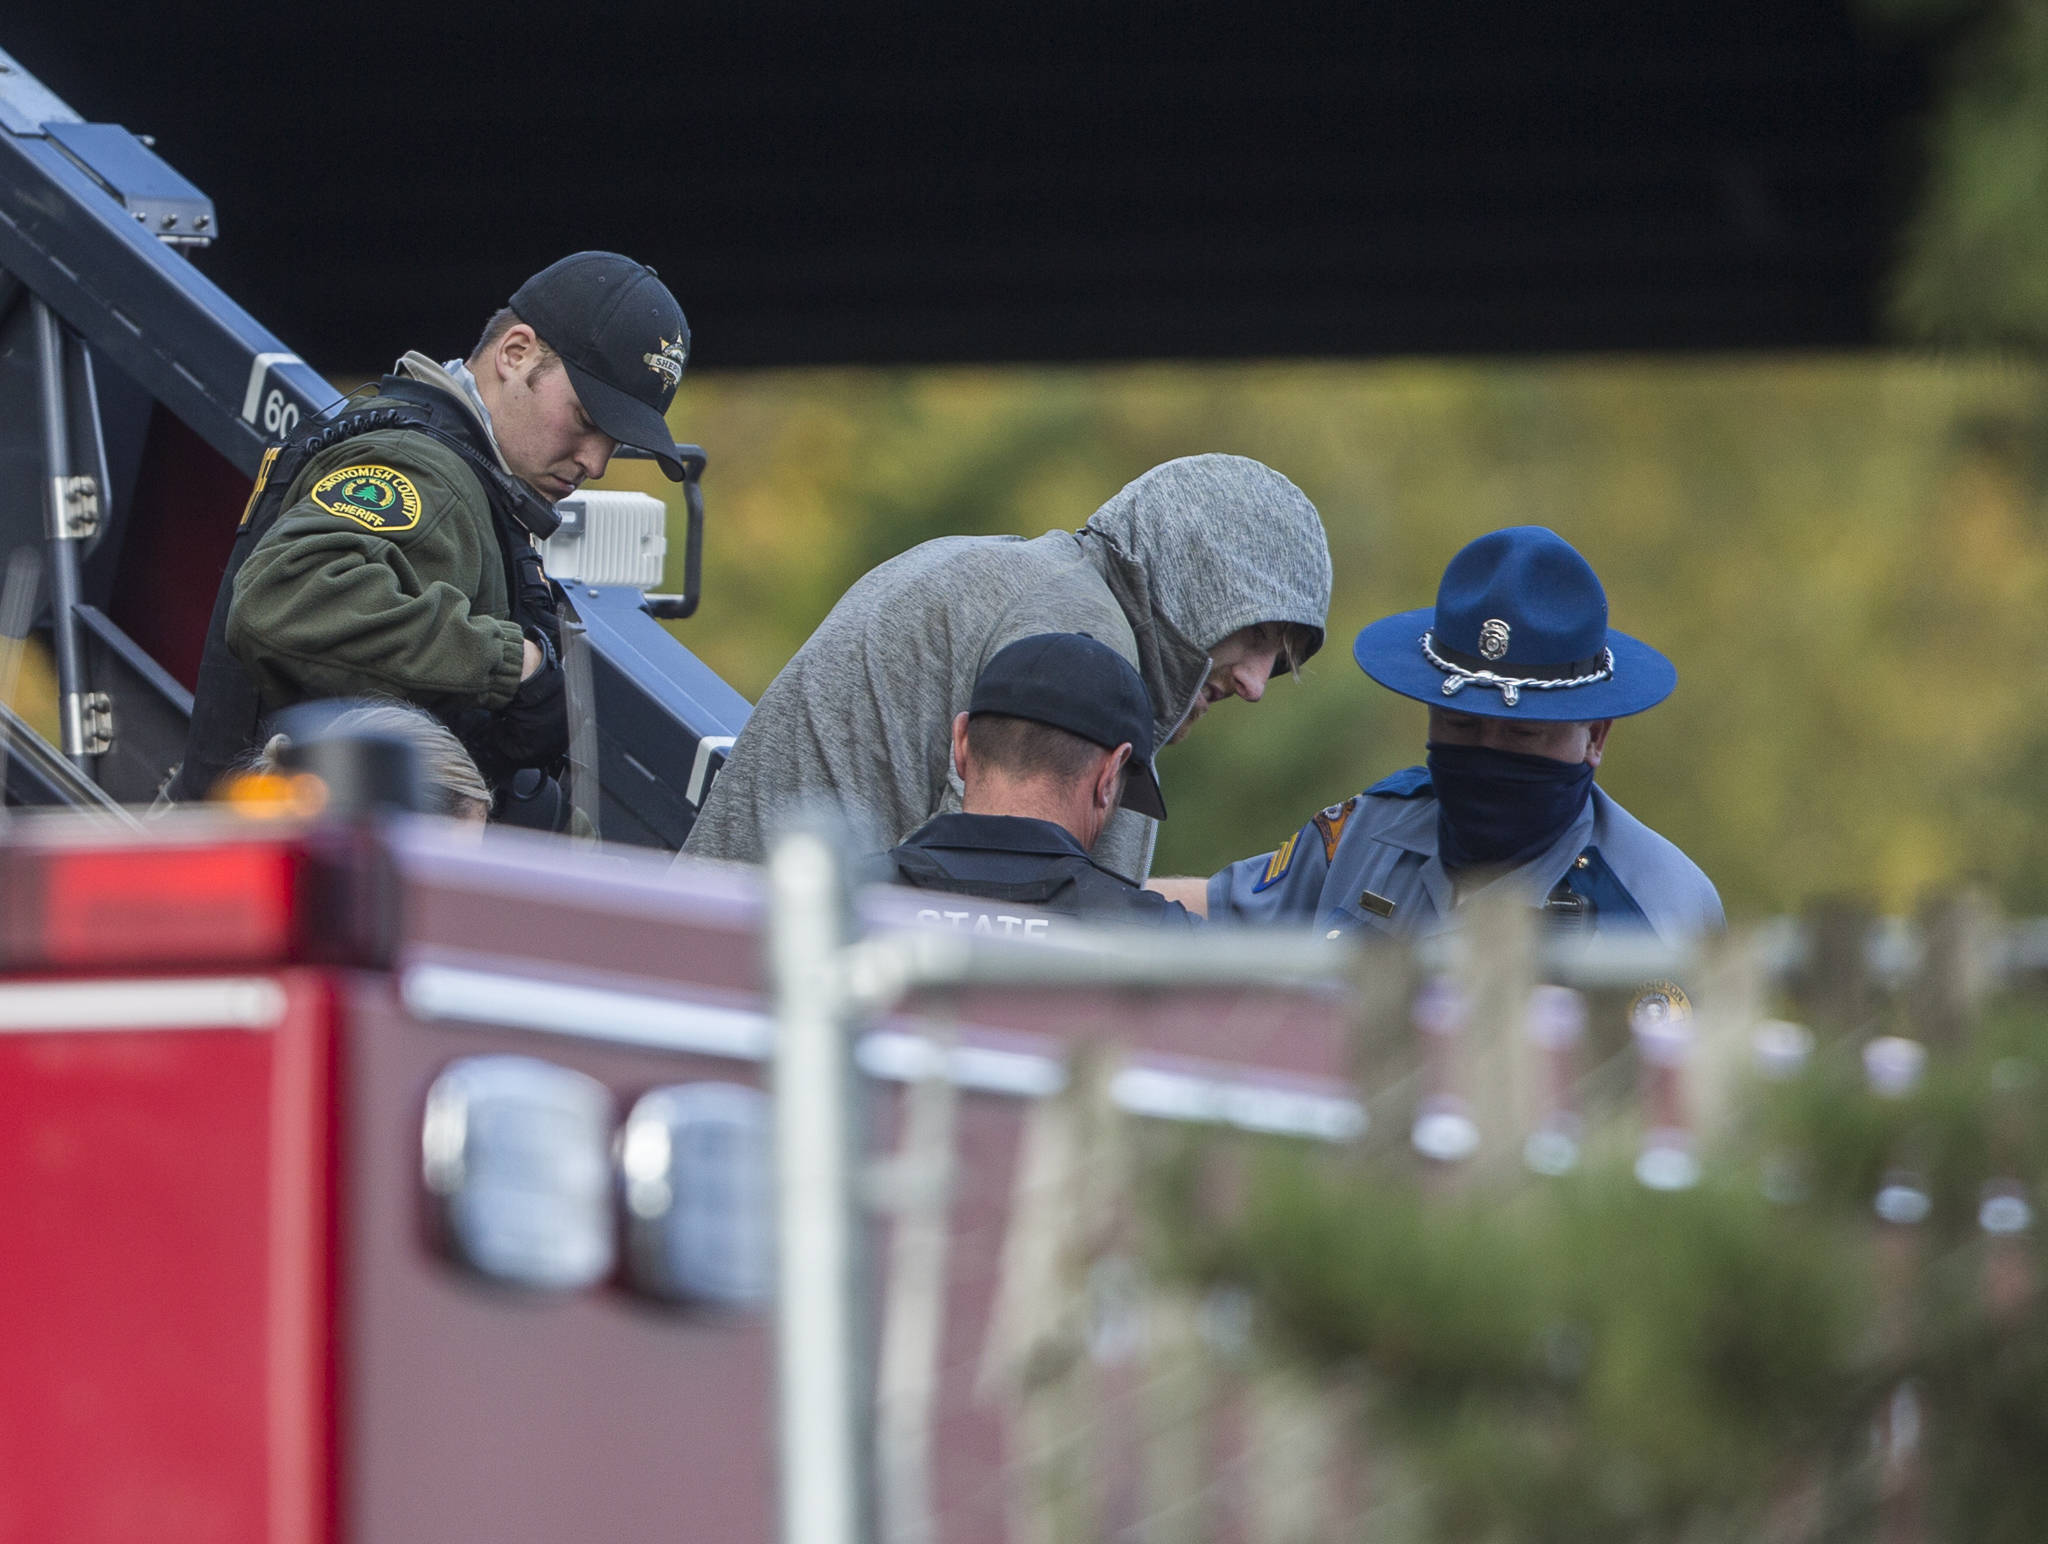 The carjacking suspect is handcuffed before being transferred to a stretcher on Wednesday near Mill Creek. (Olivia Vanni / The Herald)